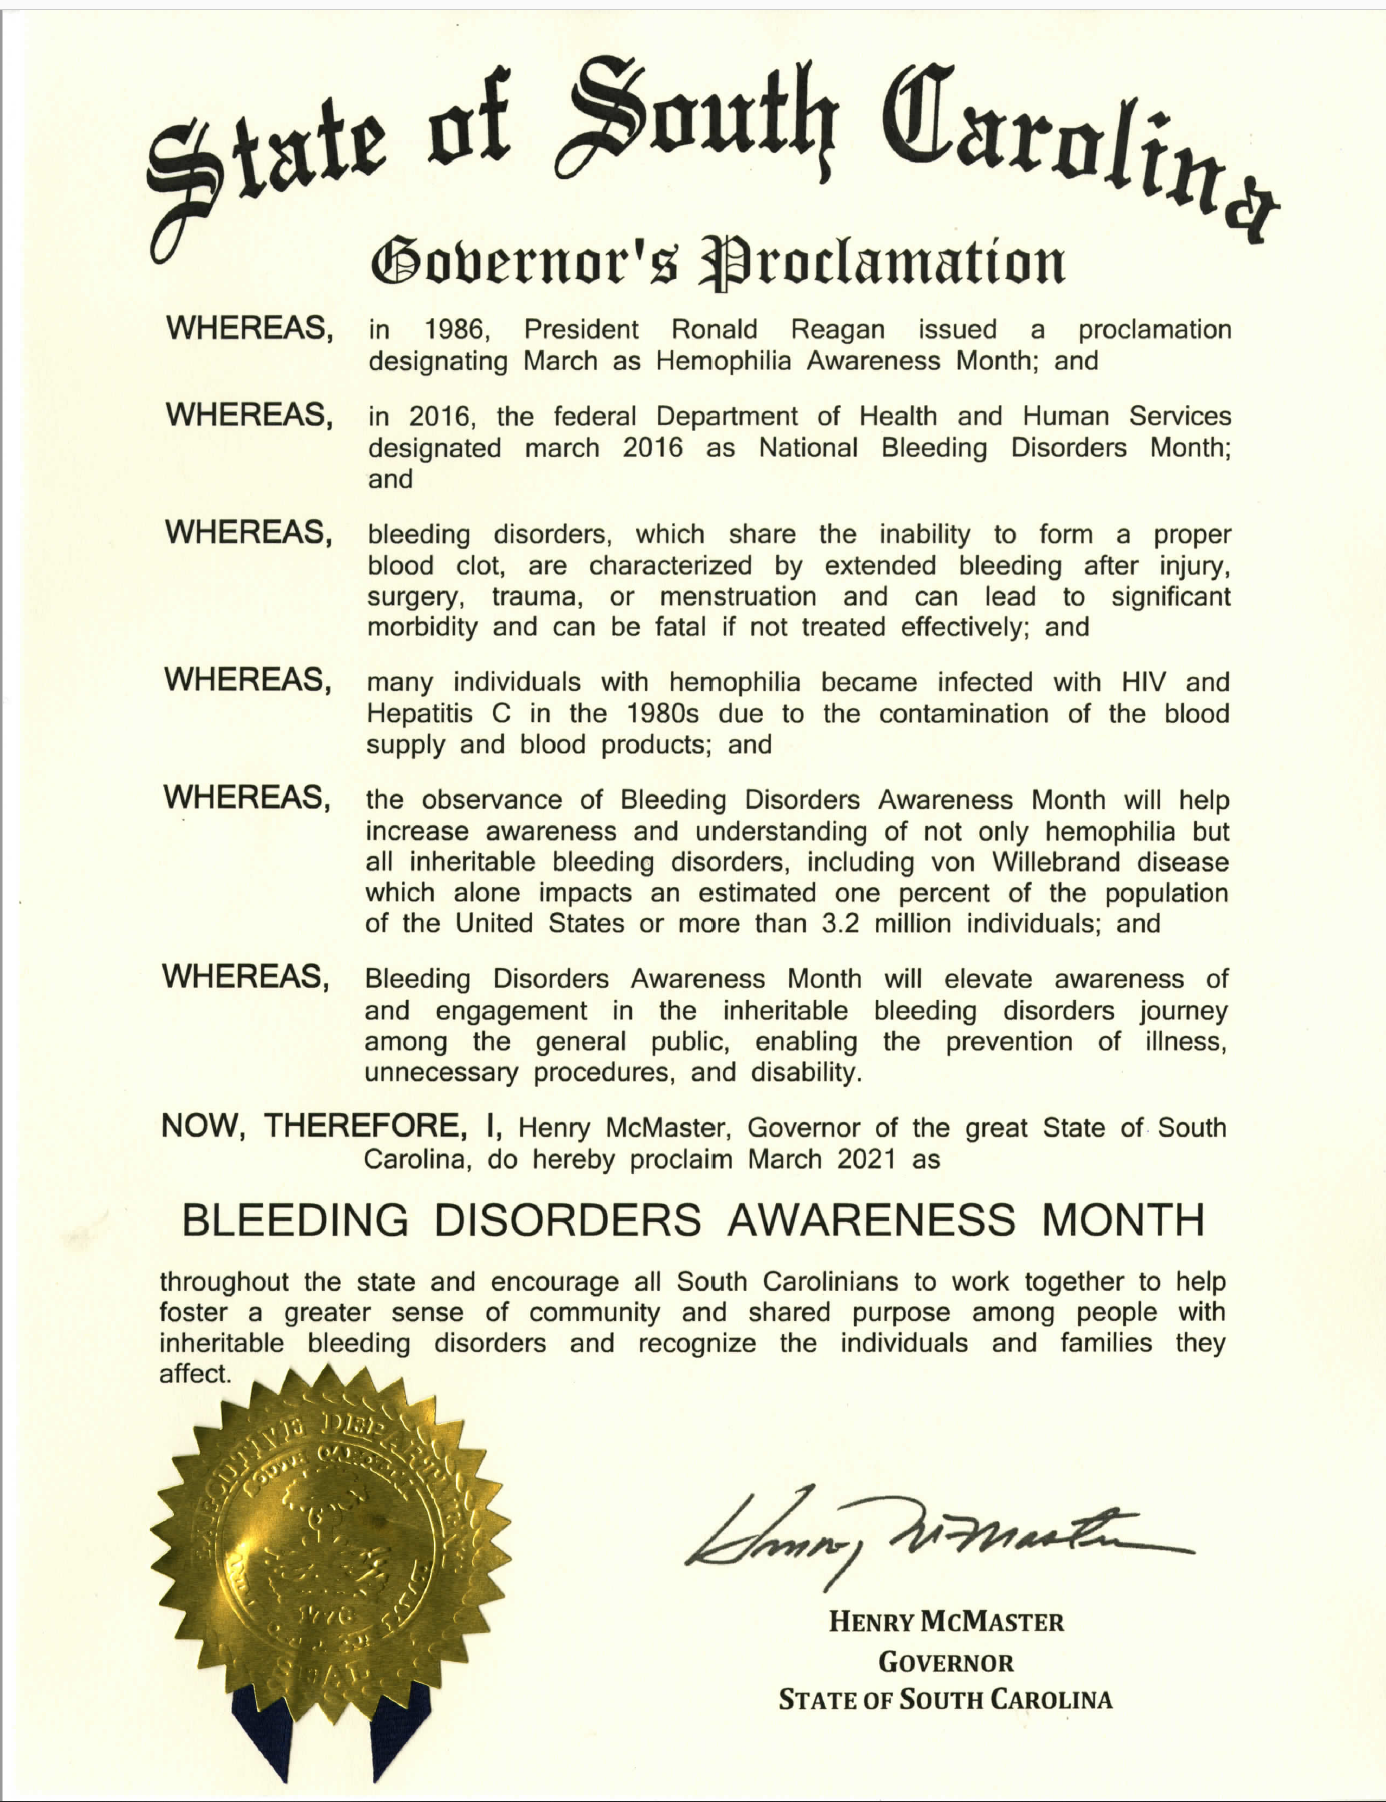 Our 2021 State of South Carolina Bleeding Disorder Awareness Month Proclamation